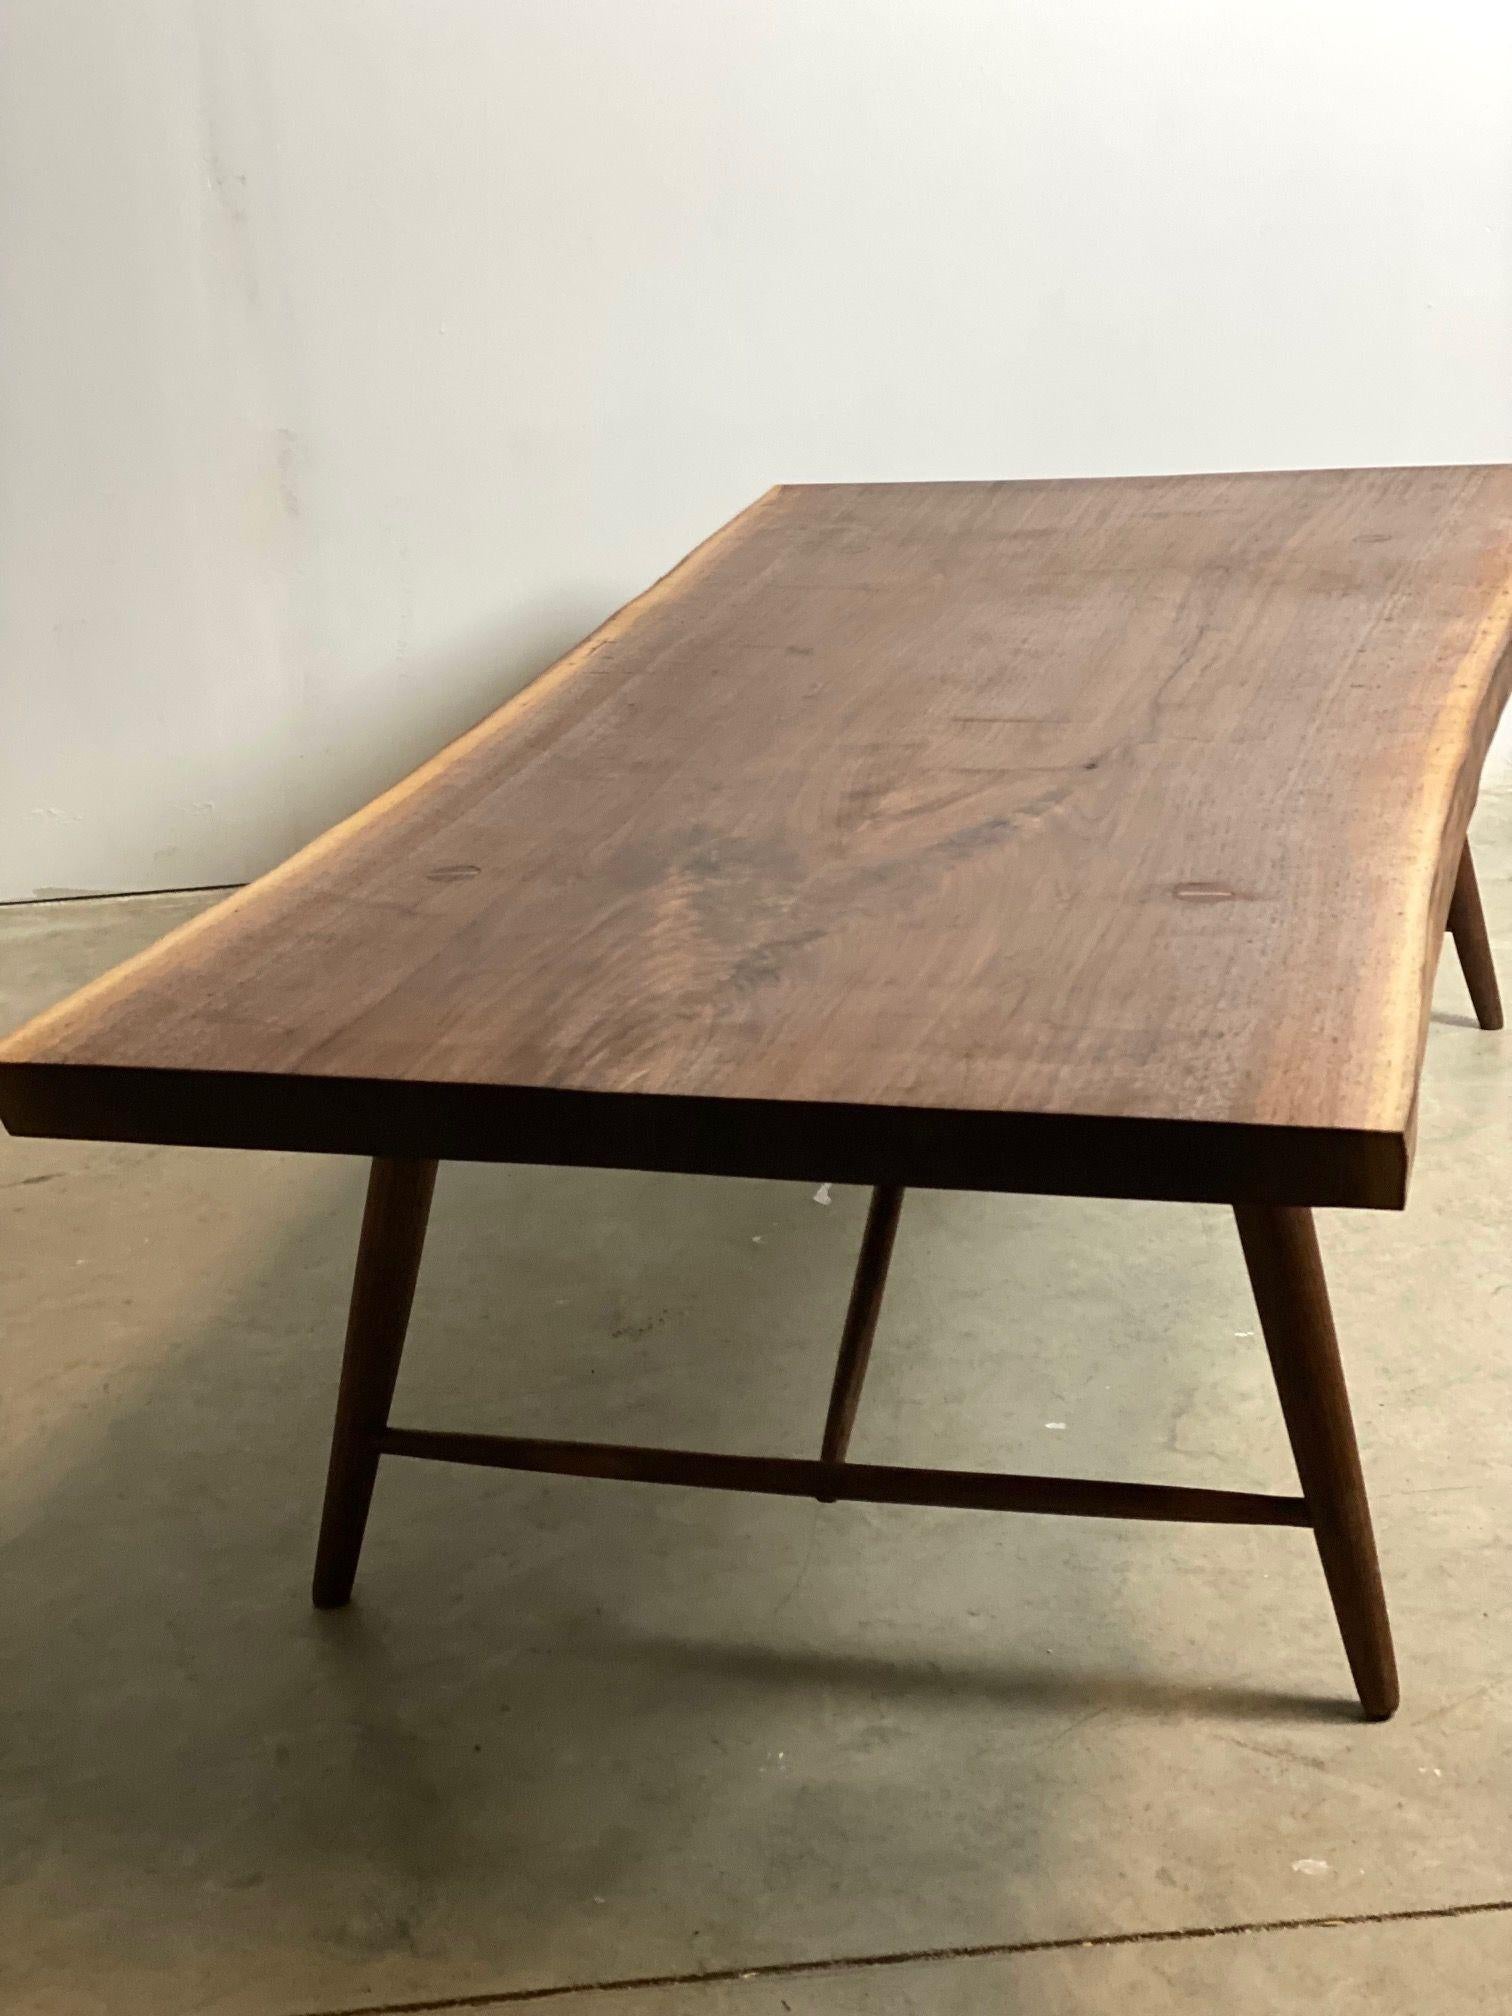 Contemporary Walnut Coffee Table by Michael Rozell, USA 2021 For Sale